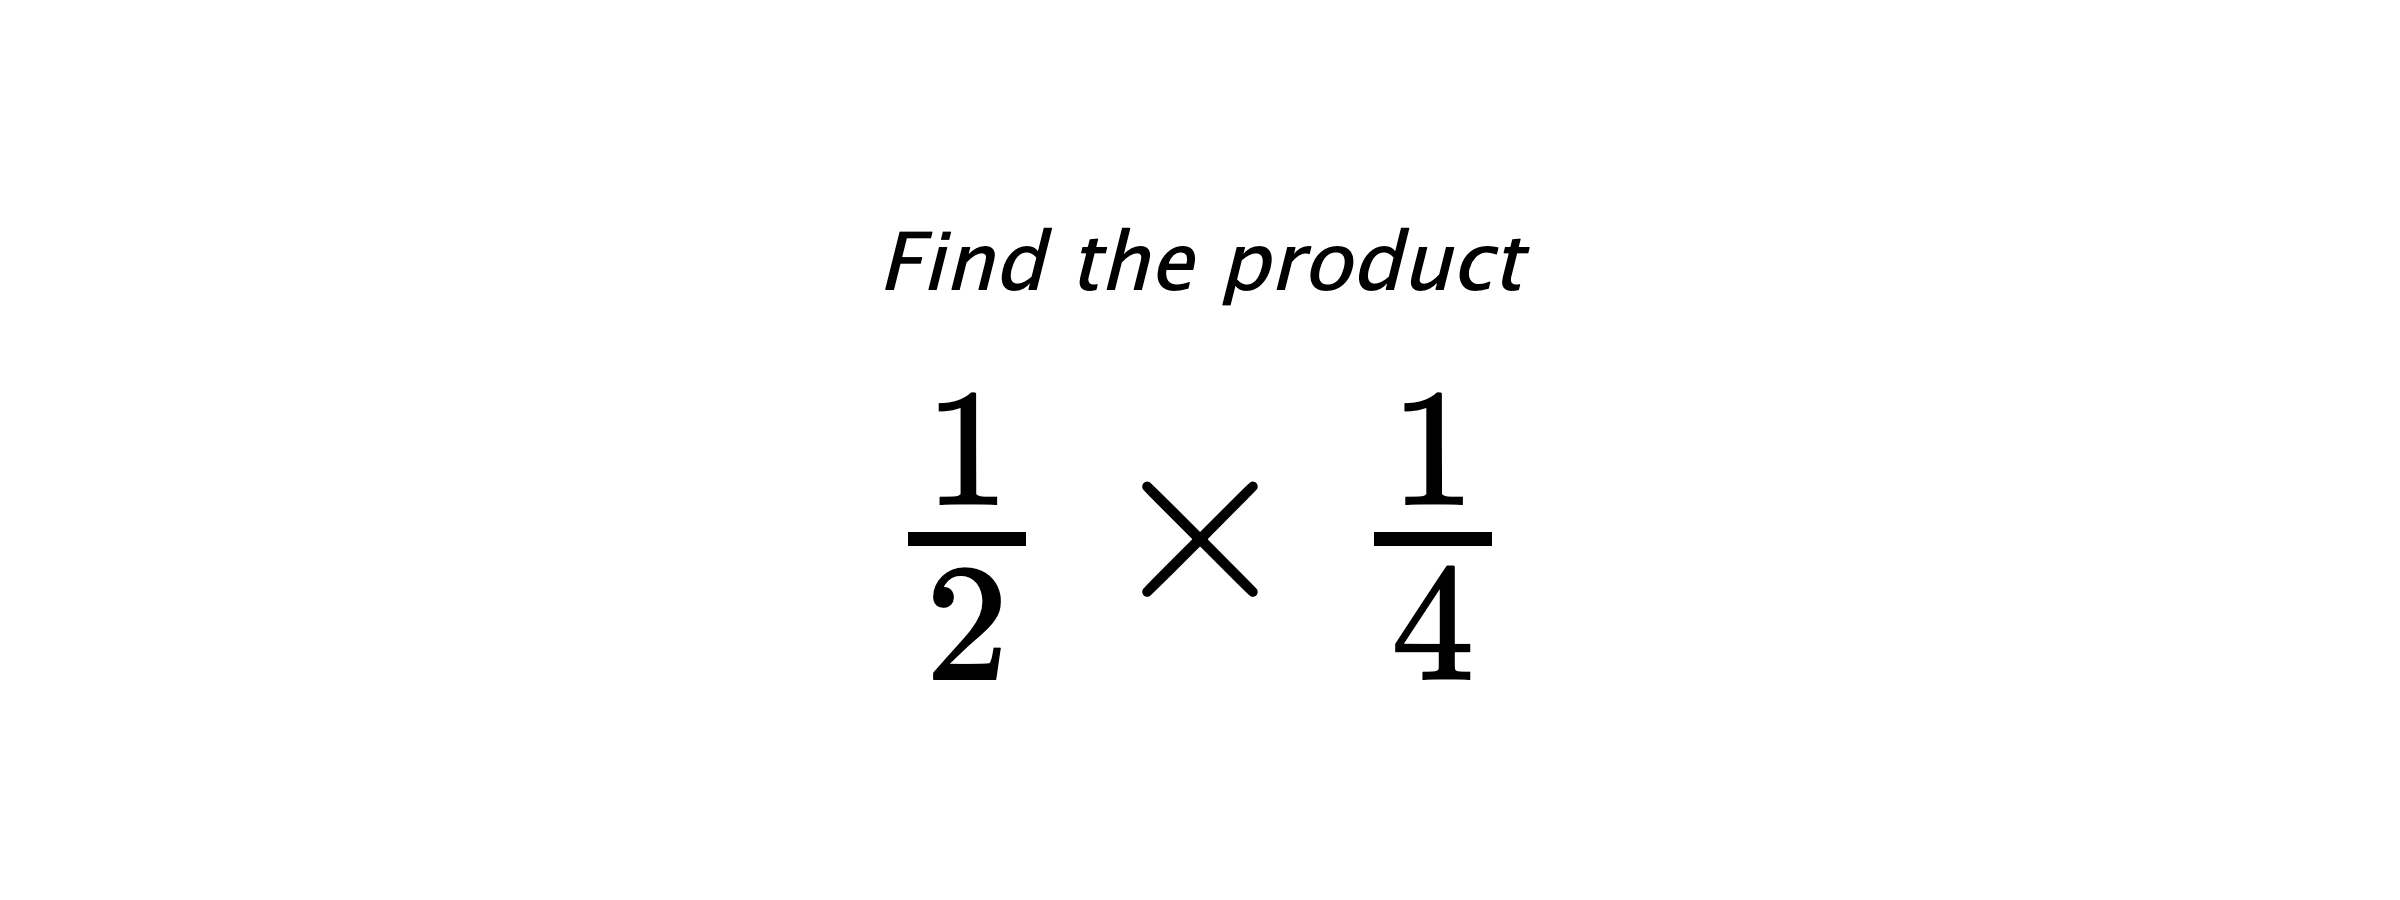 Find the product $ \frac{1}{2} \times \frac{1}{4} $